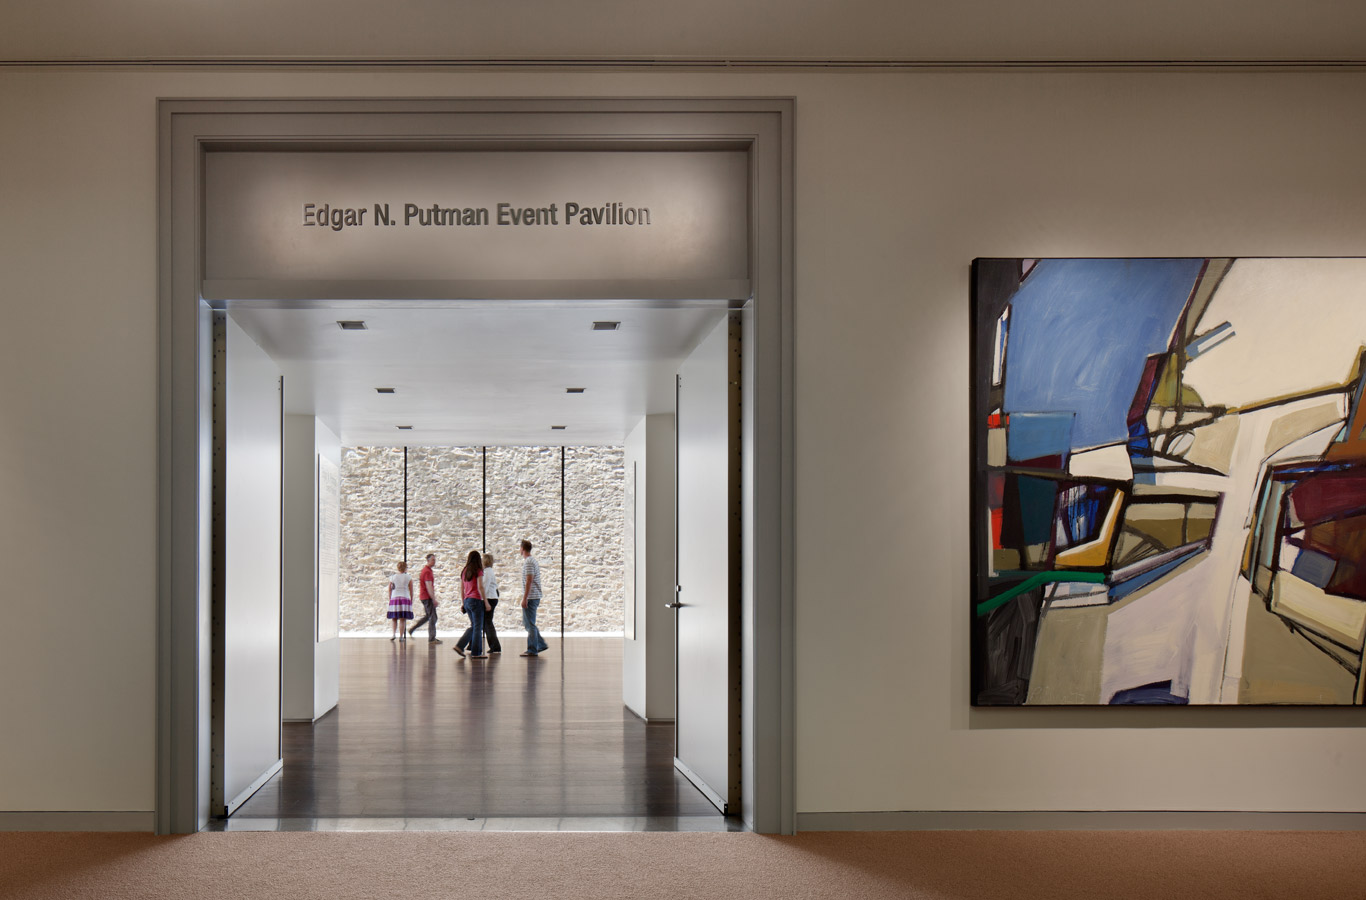 <p>Situated at the back of the museum, the pavilion draws visitors through the corridors and encourages them to experience the art. <br><small>&copy; Michael Moran/OTTO</small></p>